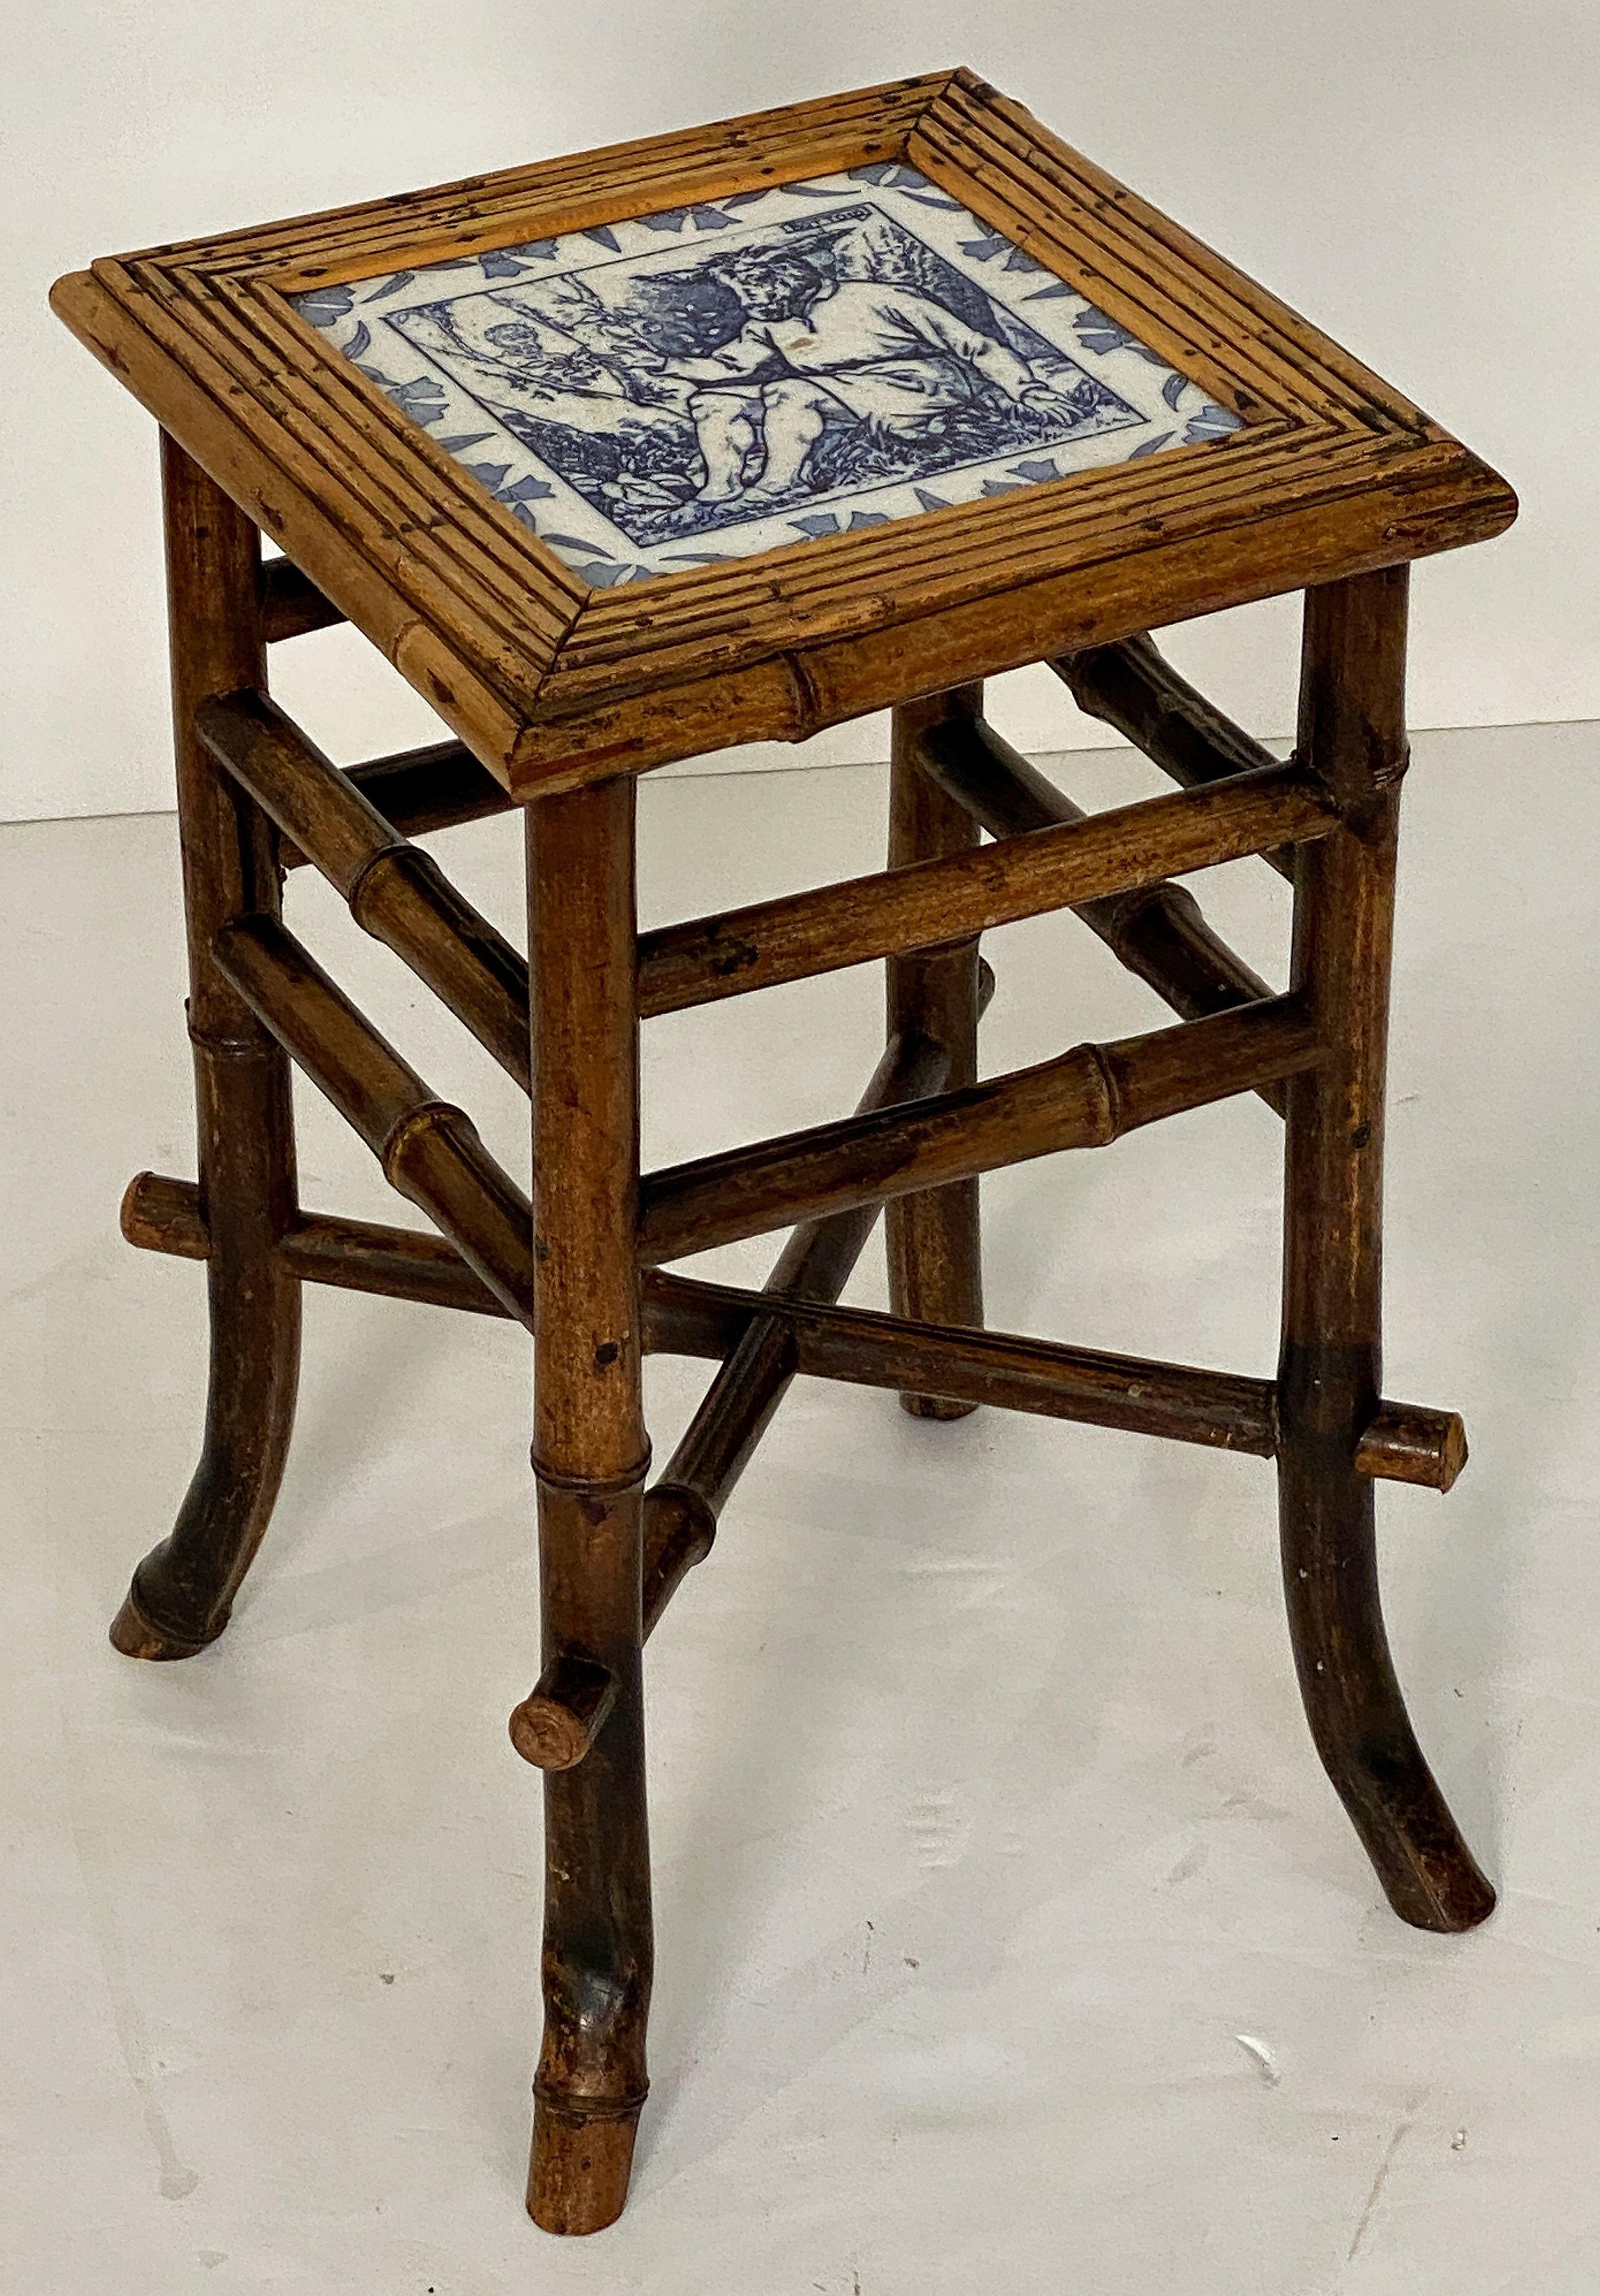 English Bamboo Table or Stool with Tile Seat from the Aesthetic Movement Era For Sale 6